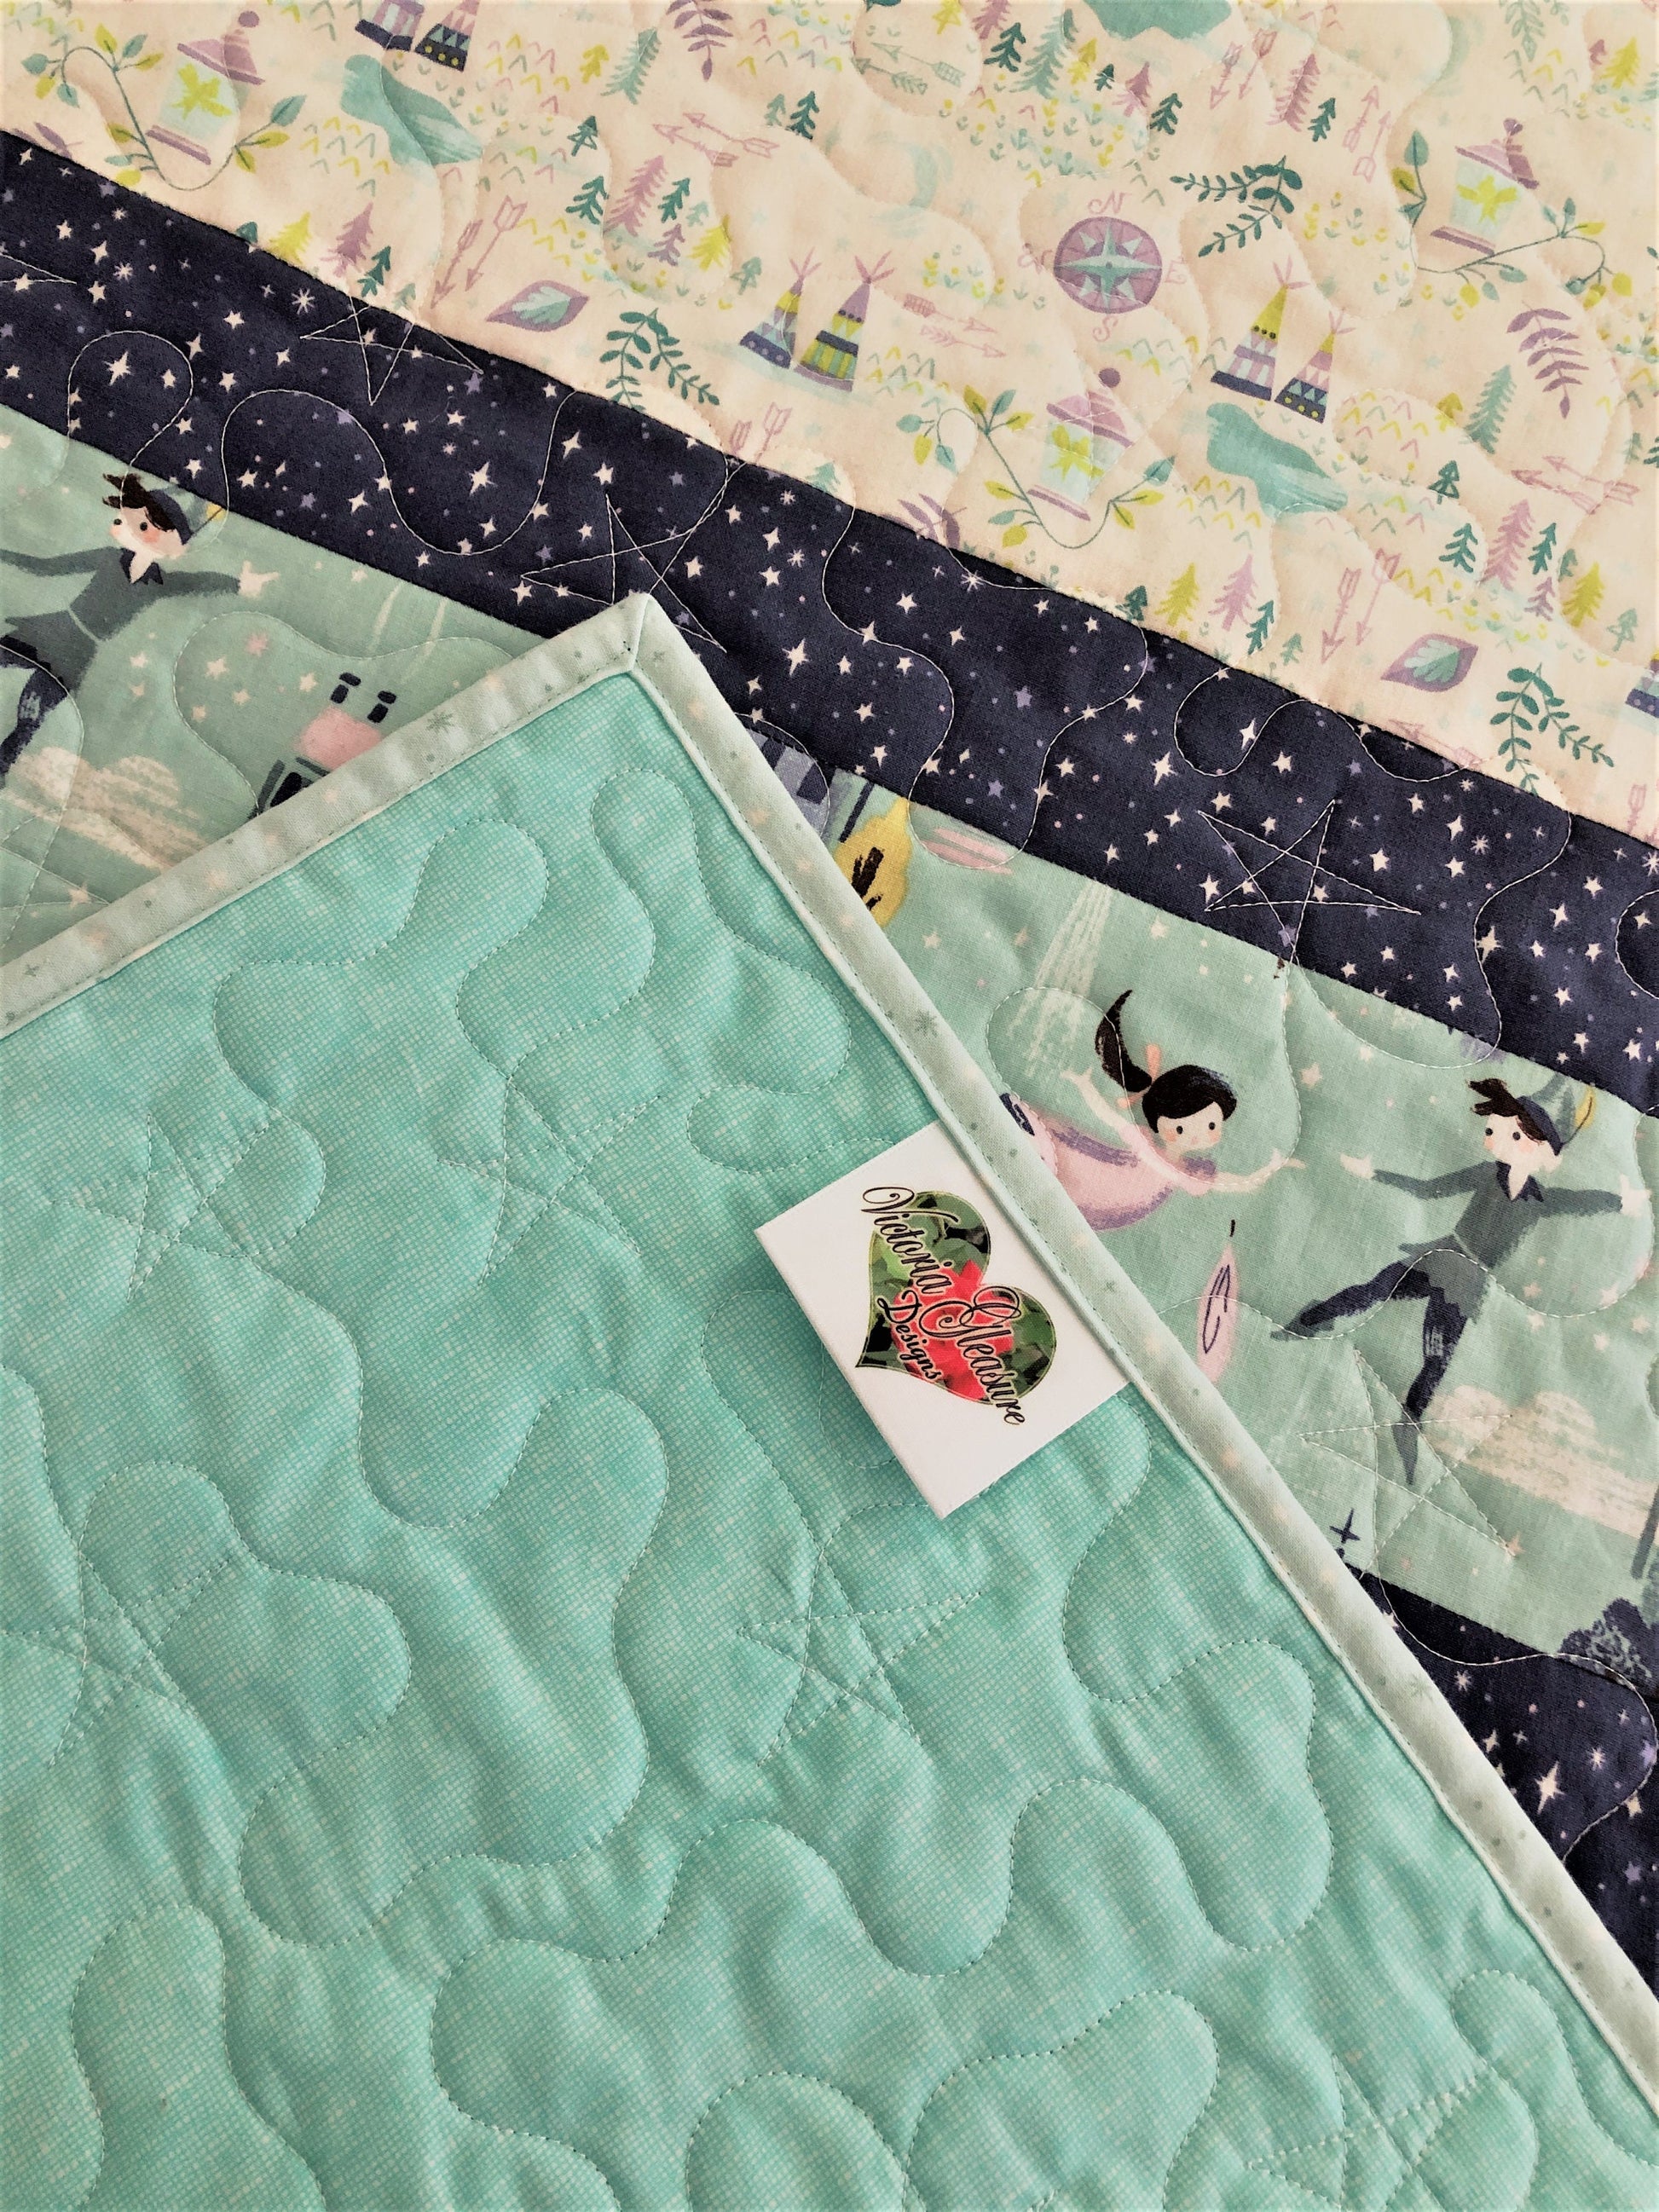 Peter Pan Neverland Quilt, Cream and Blue, Small Size